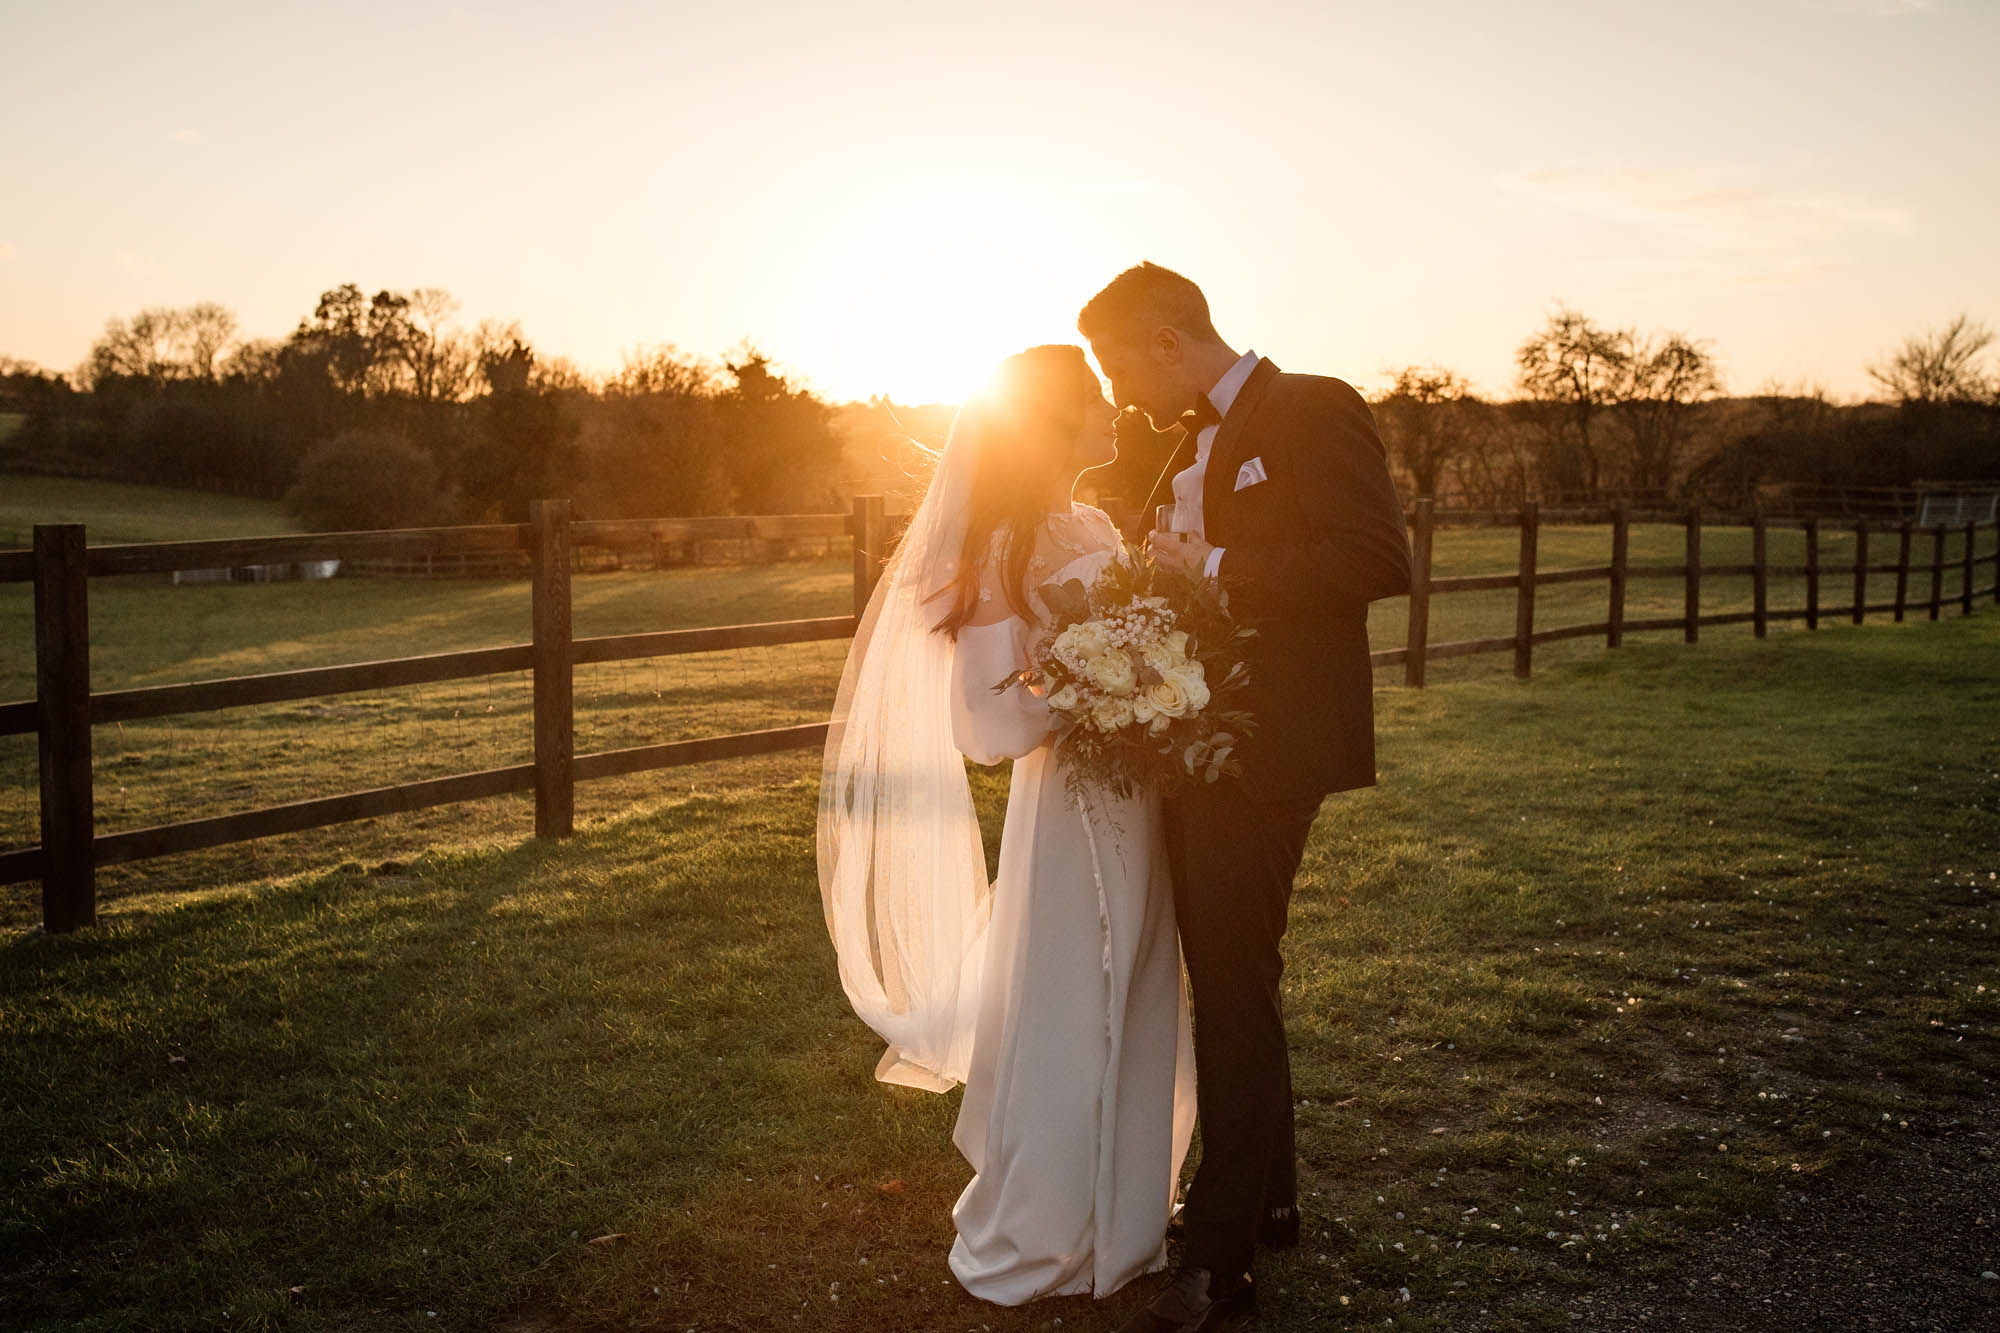 Ayron and Scott's wedding photos with amazing golden hour light and all the romance from Coltsfoot, with Becky Harley Photography